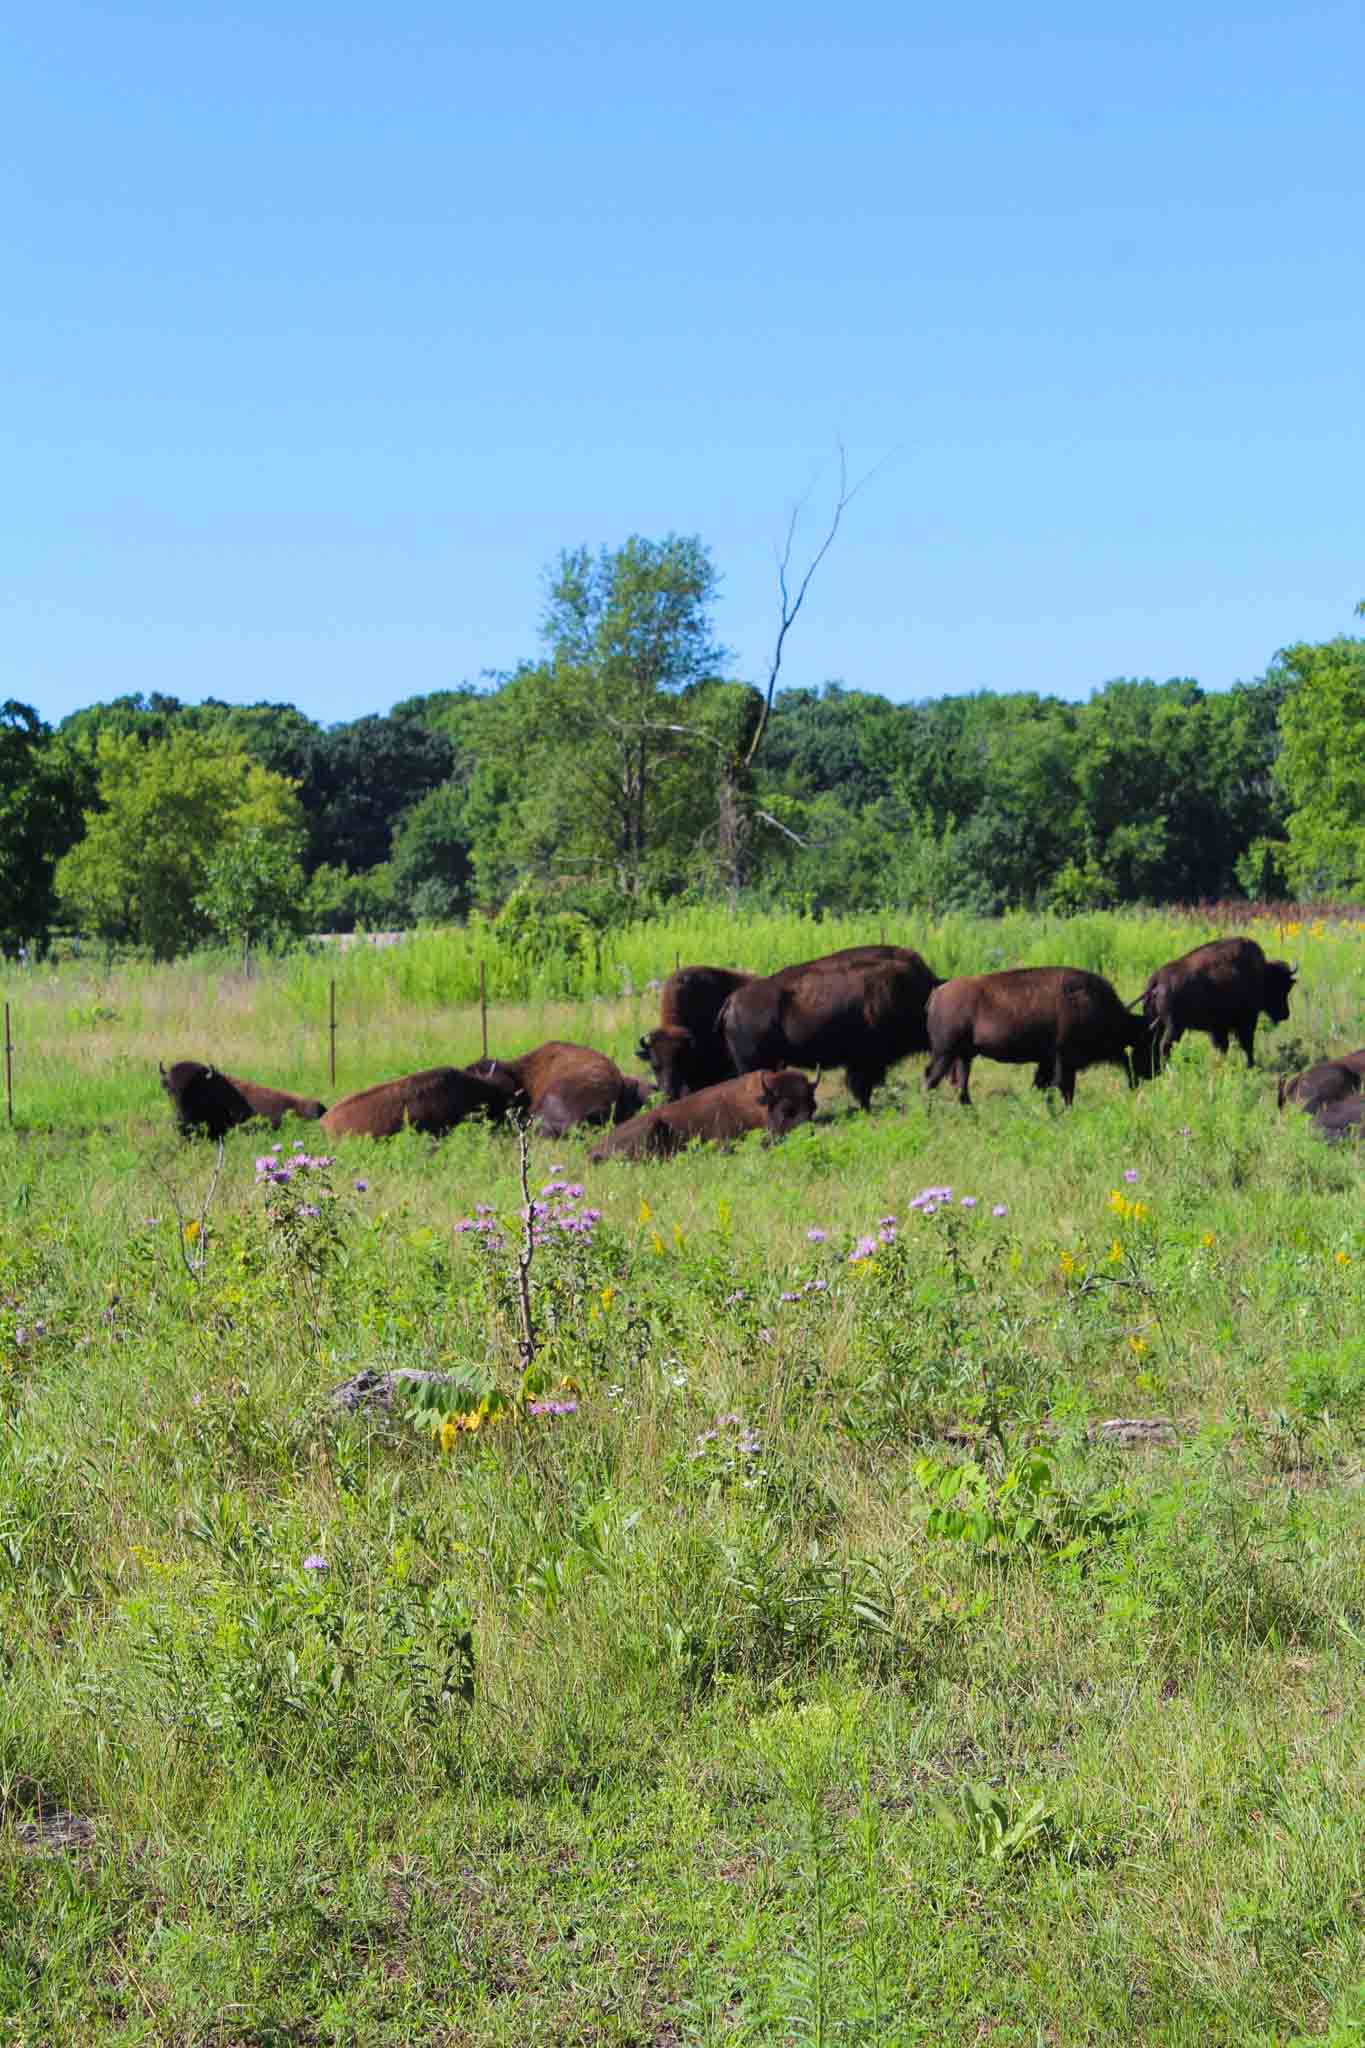 Mankato Bison and other fun things to do in Mankato MN